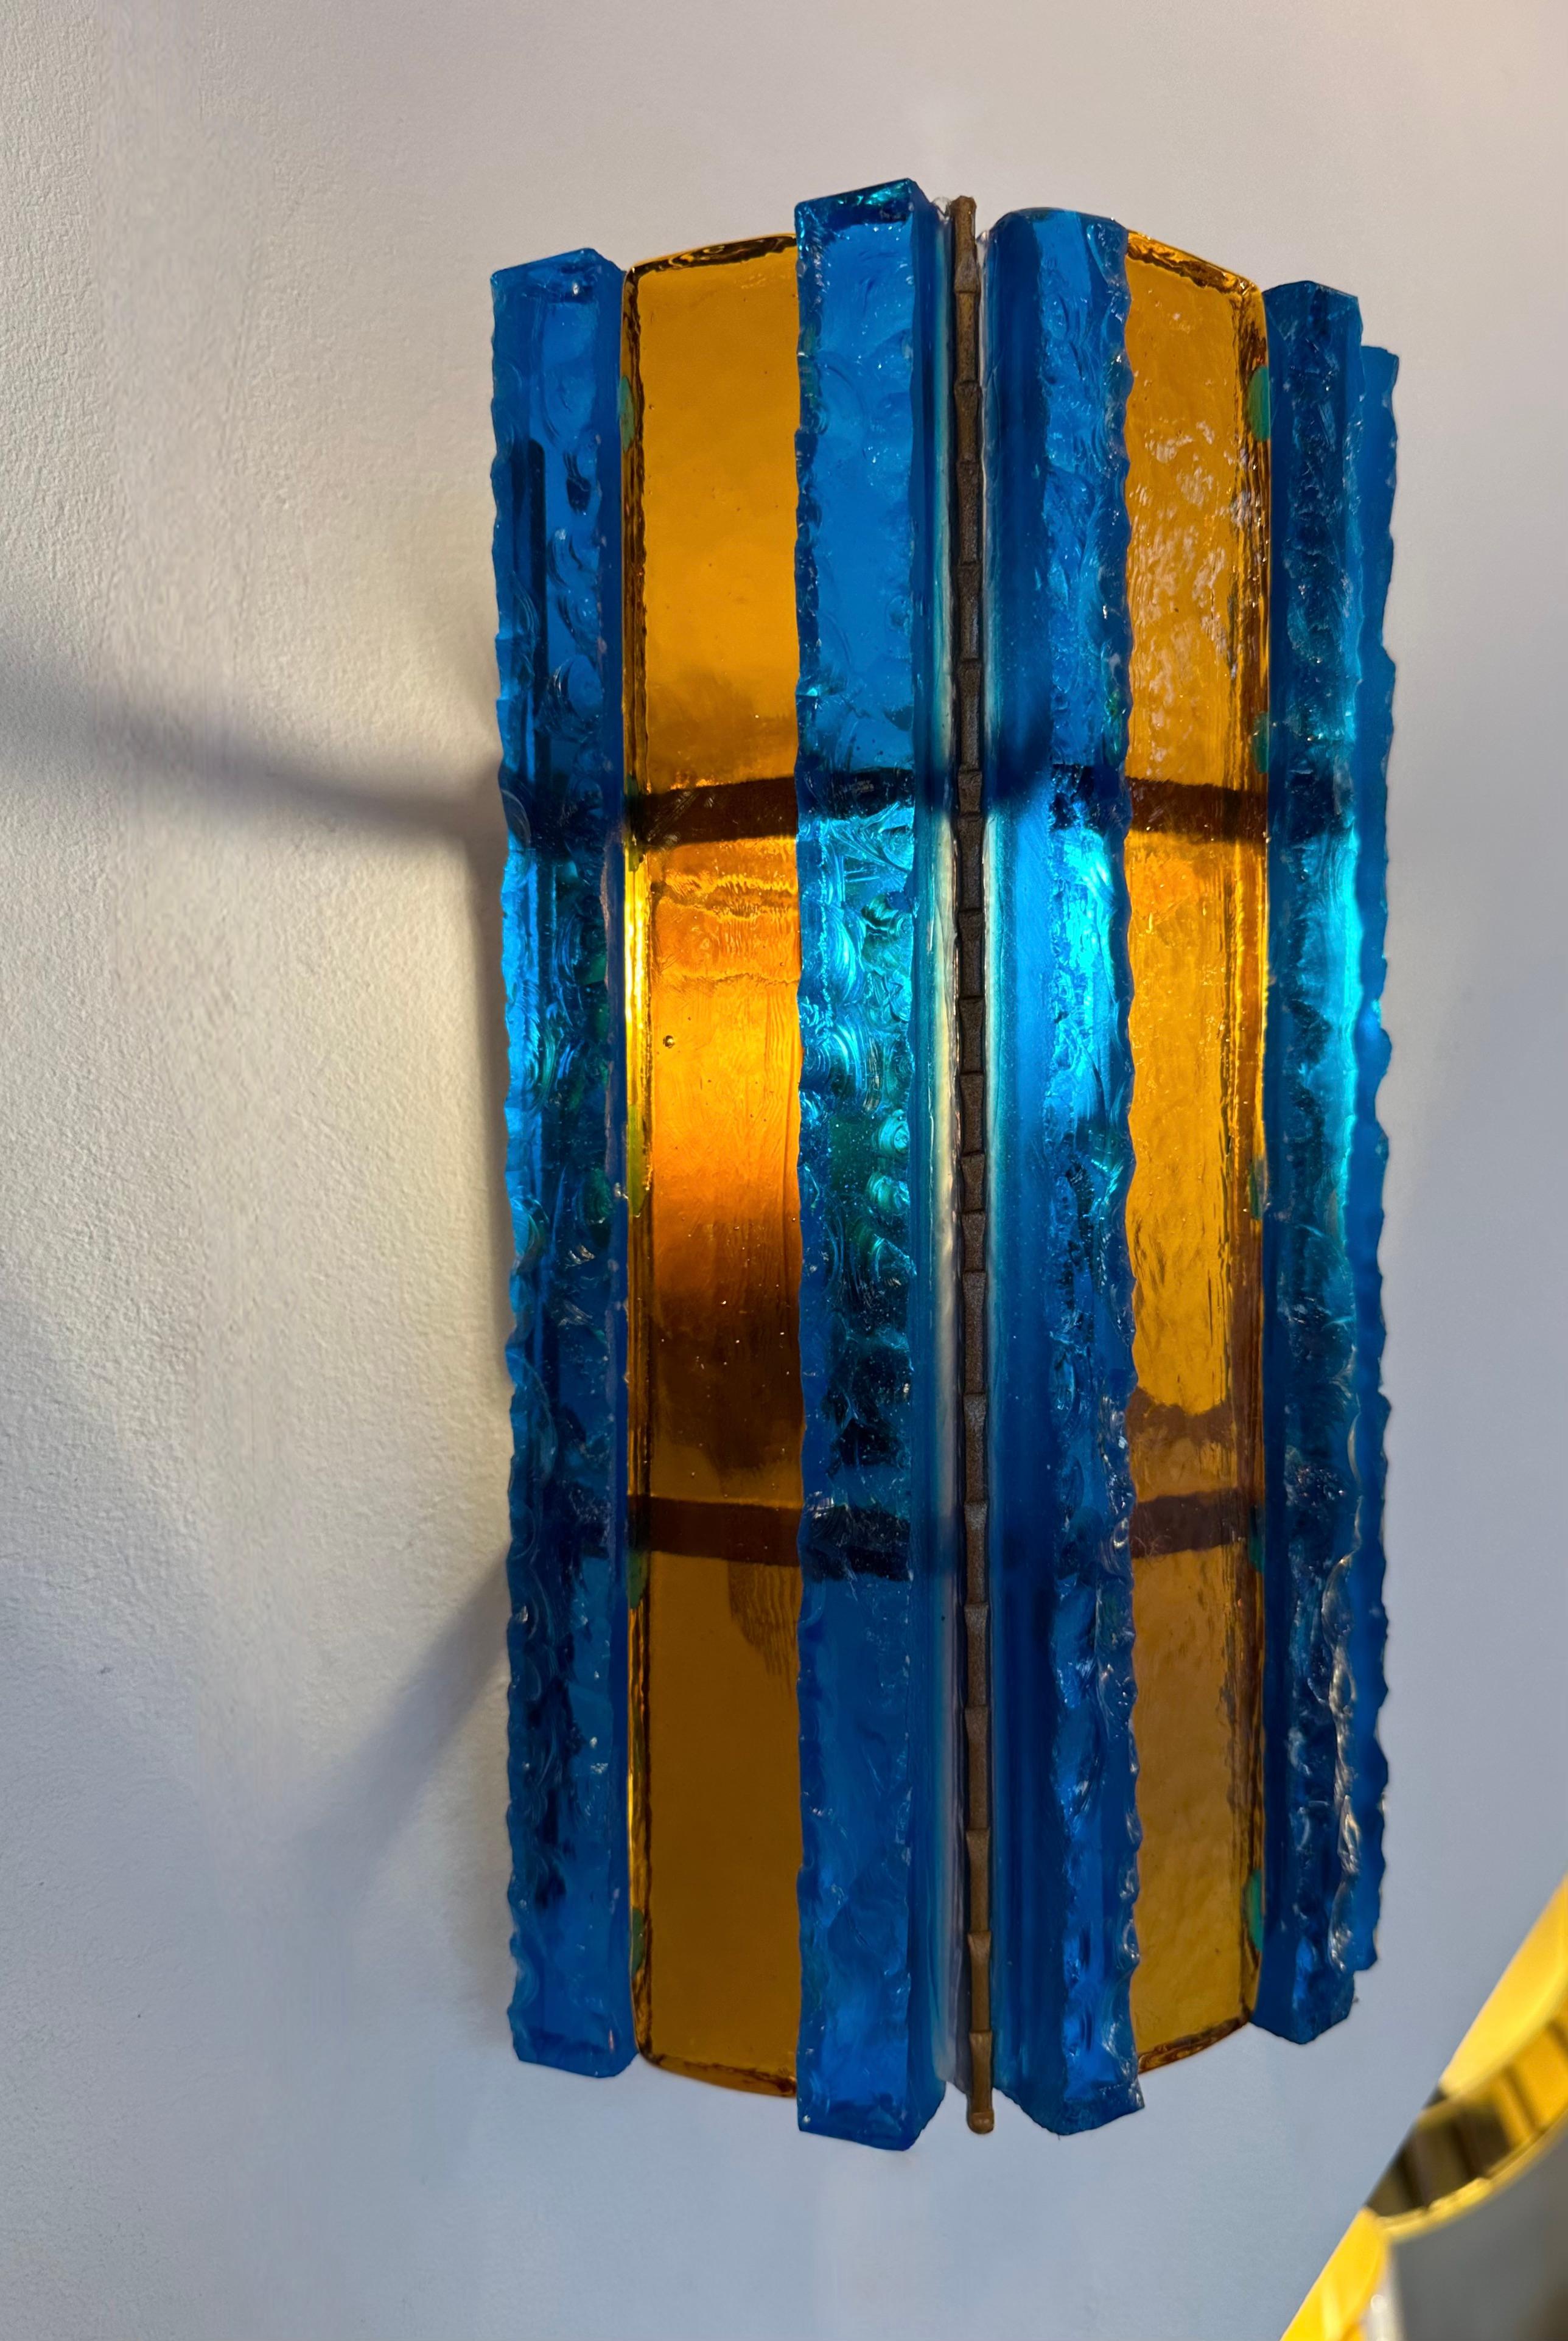 Italian Pair of Hammered Glass Wrought Iron Sconces by Longobard, Italy, 1970s For Sale